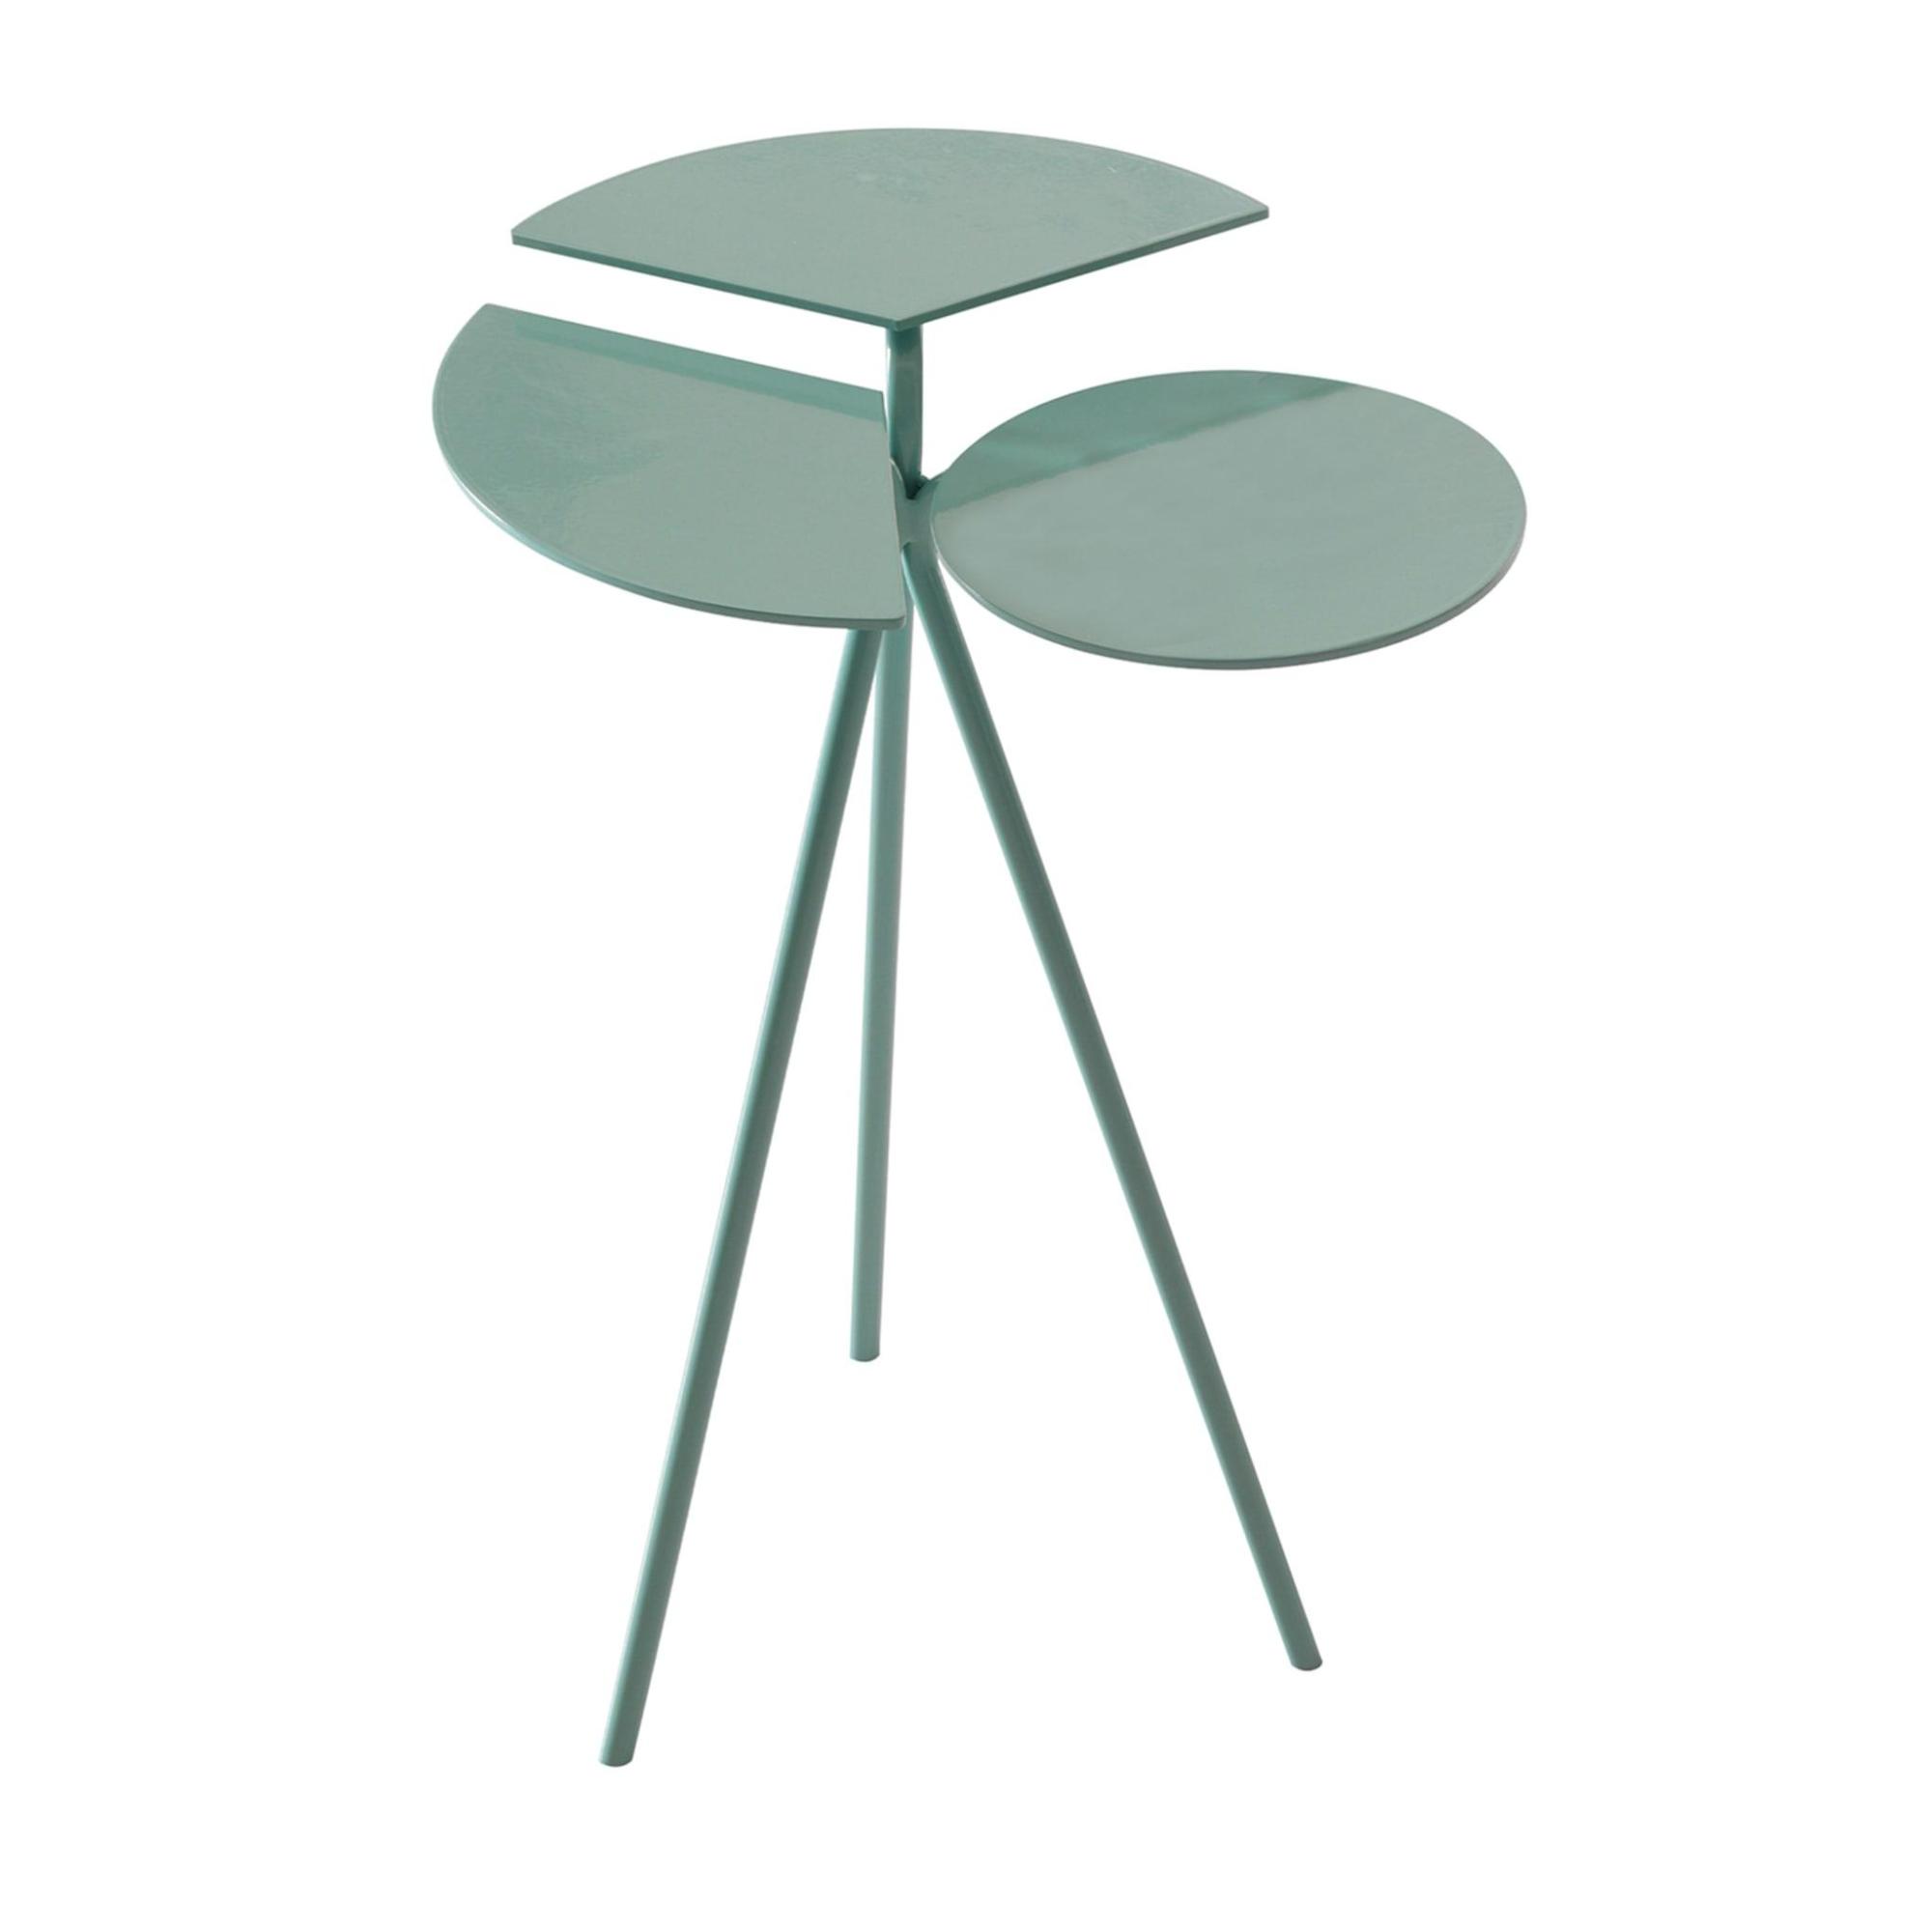 Lady Bug Green Side Table